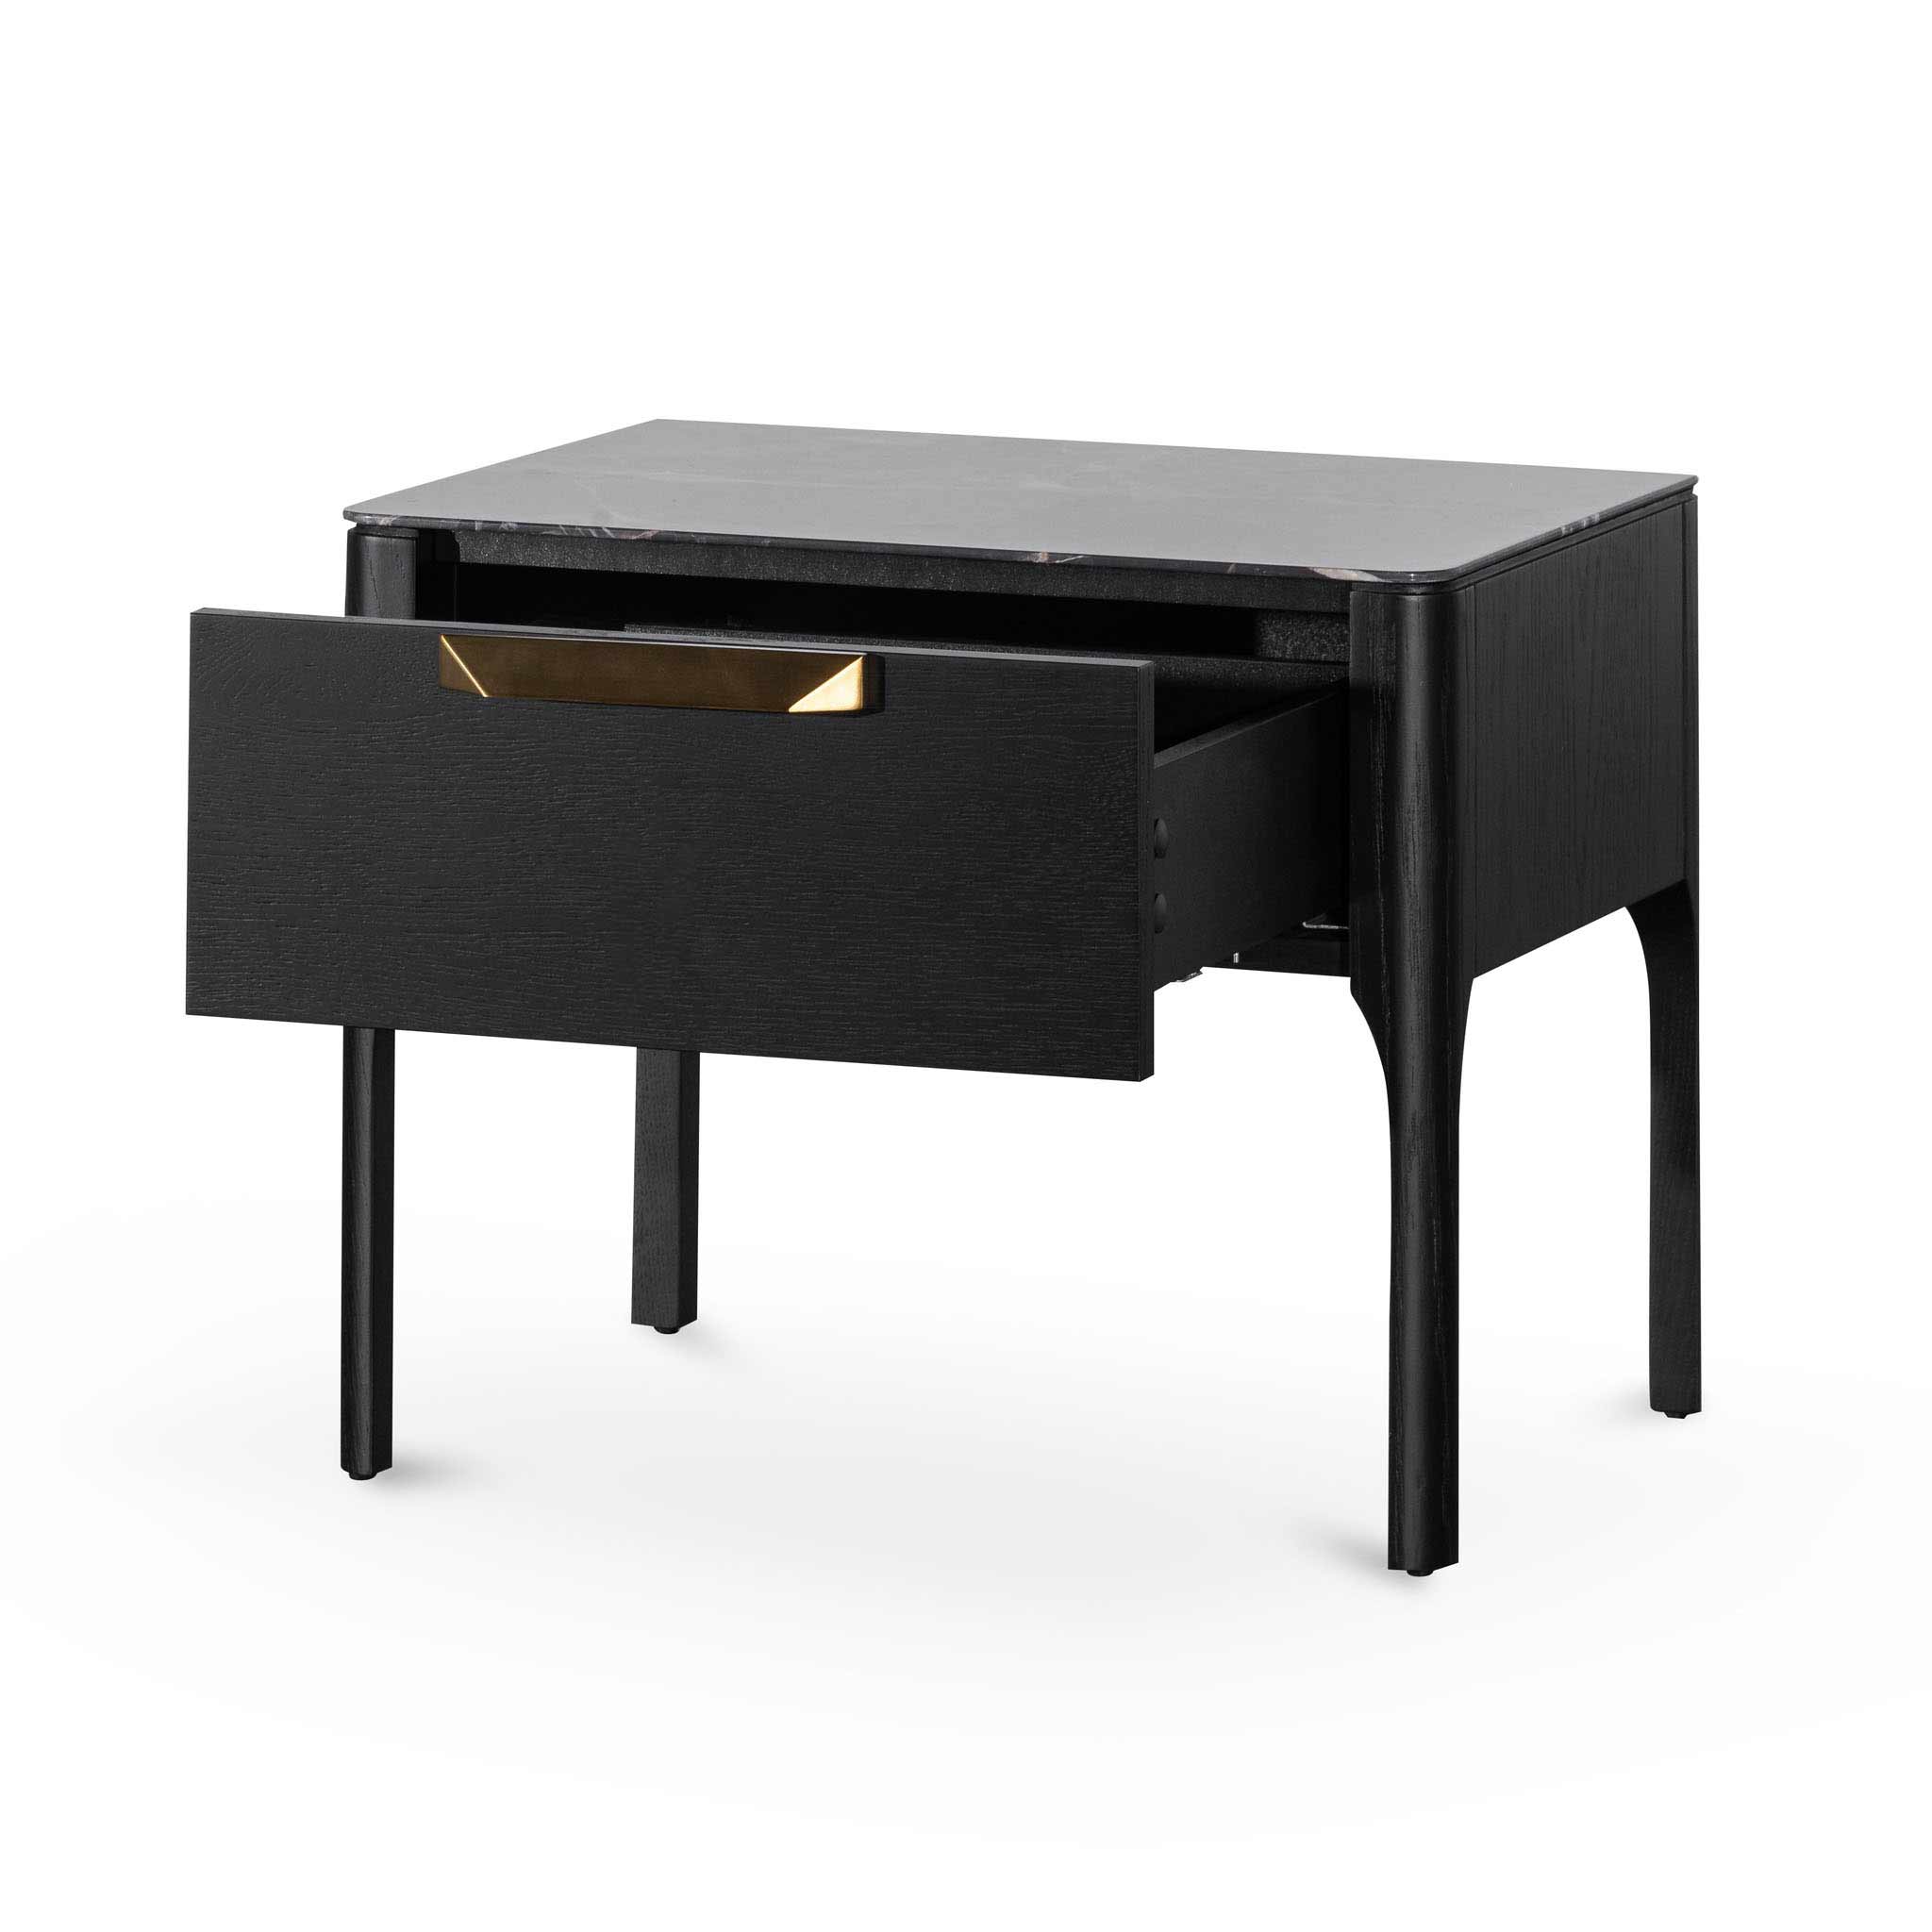 Aspen Wooden Bedside Table - Black with Marble Top - Bedside Tables